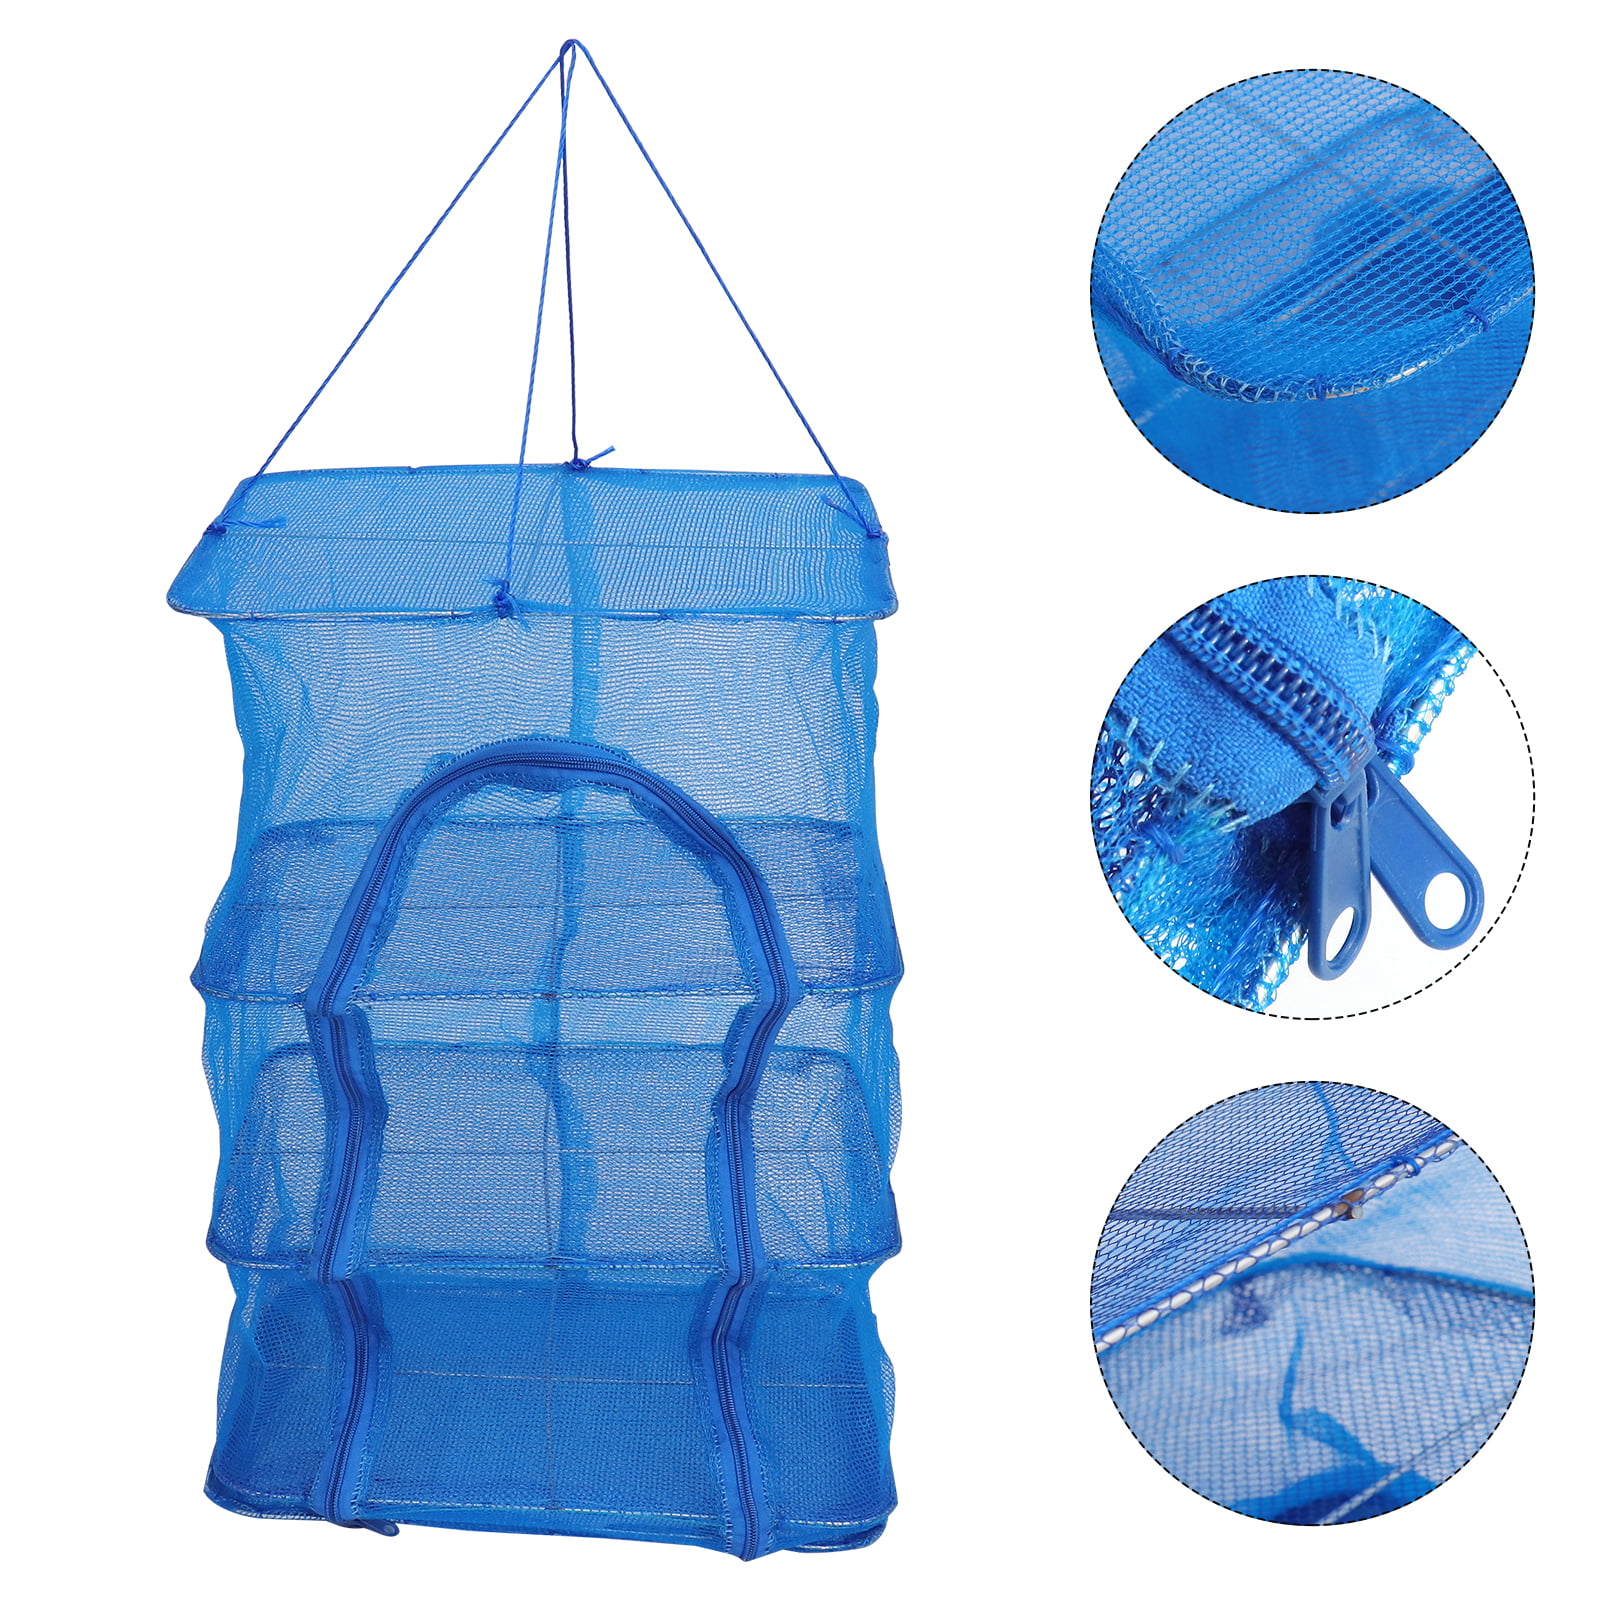 Details about   Fishing Hanging Net 4 Layers Drying Rack Folding Small Mesh Fish Vegetable 